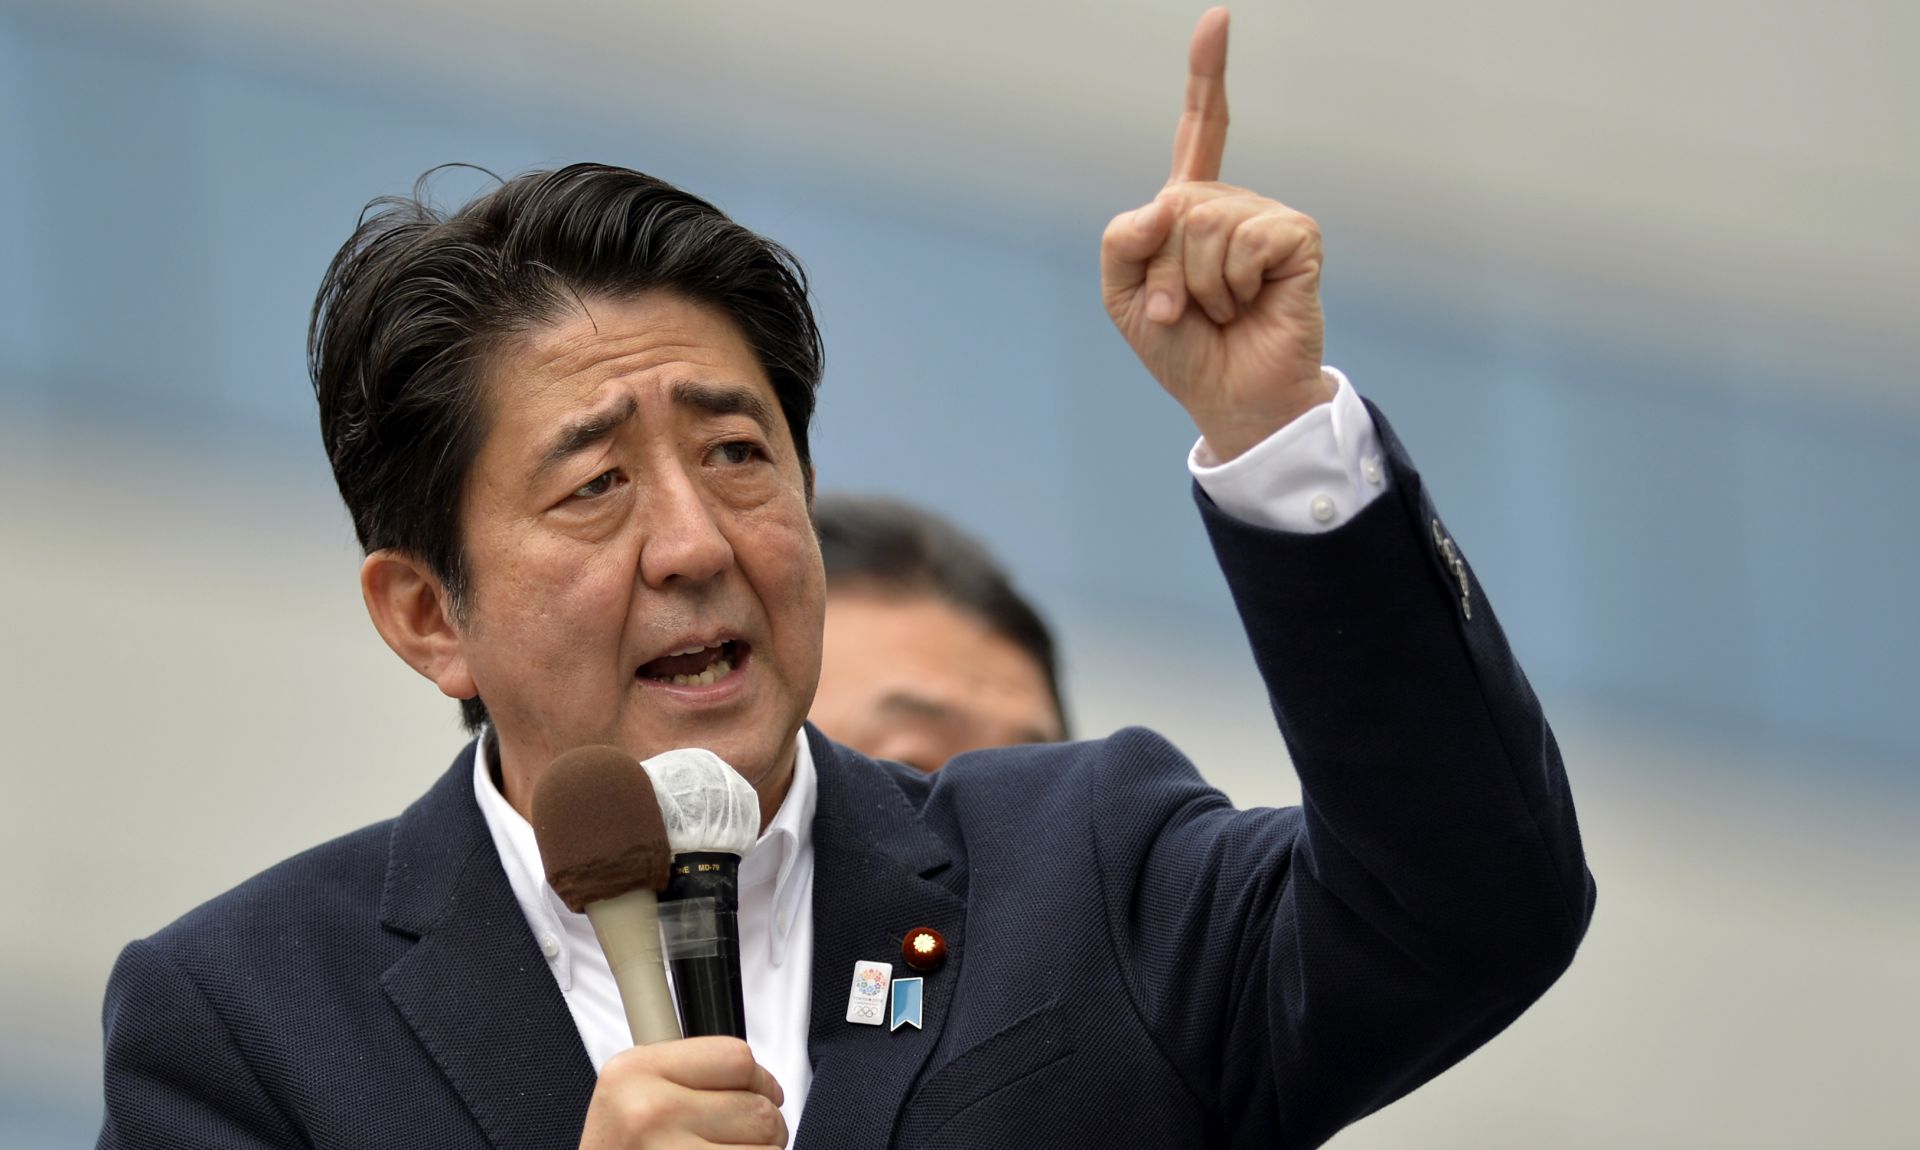 epa08630776 (FILE) - Japan's Prime Minister and leader of the ruling Liberal Democratic Party Shinzo Abe speaks to voters from the roof of a campaign van in Tokyo, Japan, 04 July 2013 (re-issued 28 August 2020). Abe is reportedly about to announce his resignation as prime minister on 28 August 2020.  EPA/FRANCK ROBICHON *** Local Caption *** 50904293